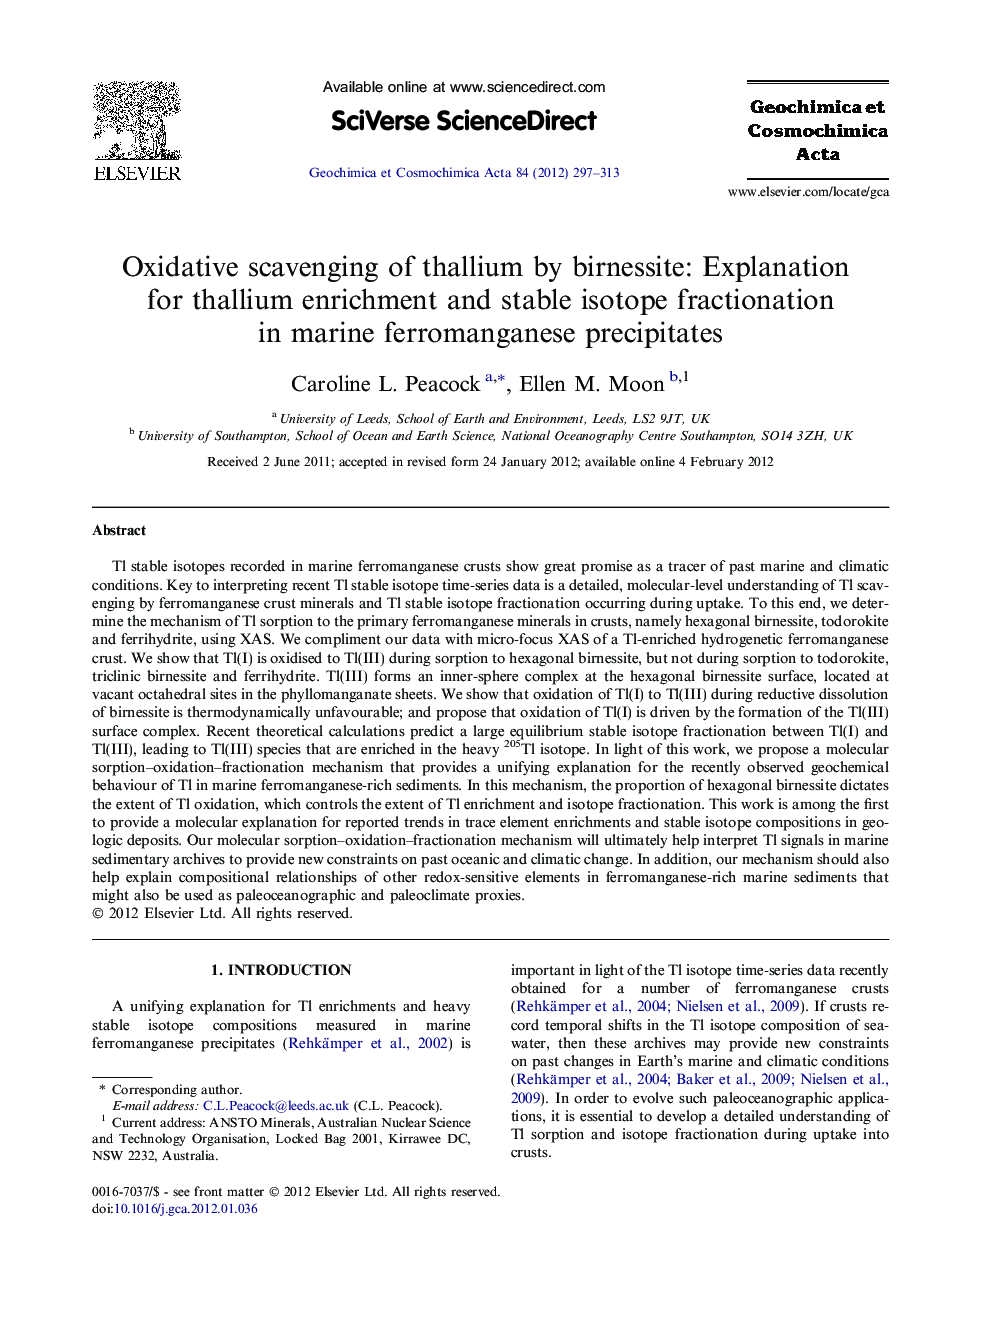 Oxidative scavenging of thallium by birnessite: Explanation for thallium enrichment and stable isotope fractionation in marine ferromanganese precipitates